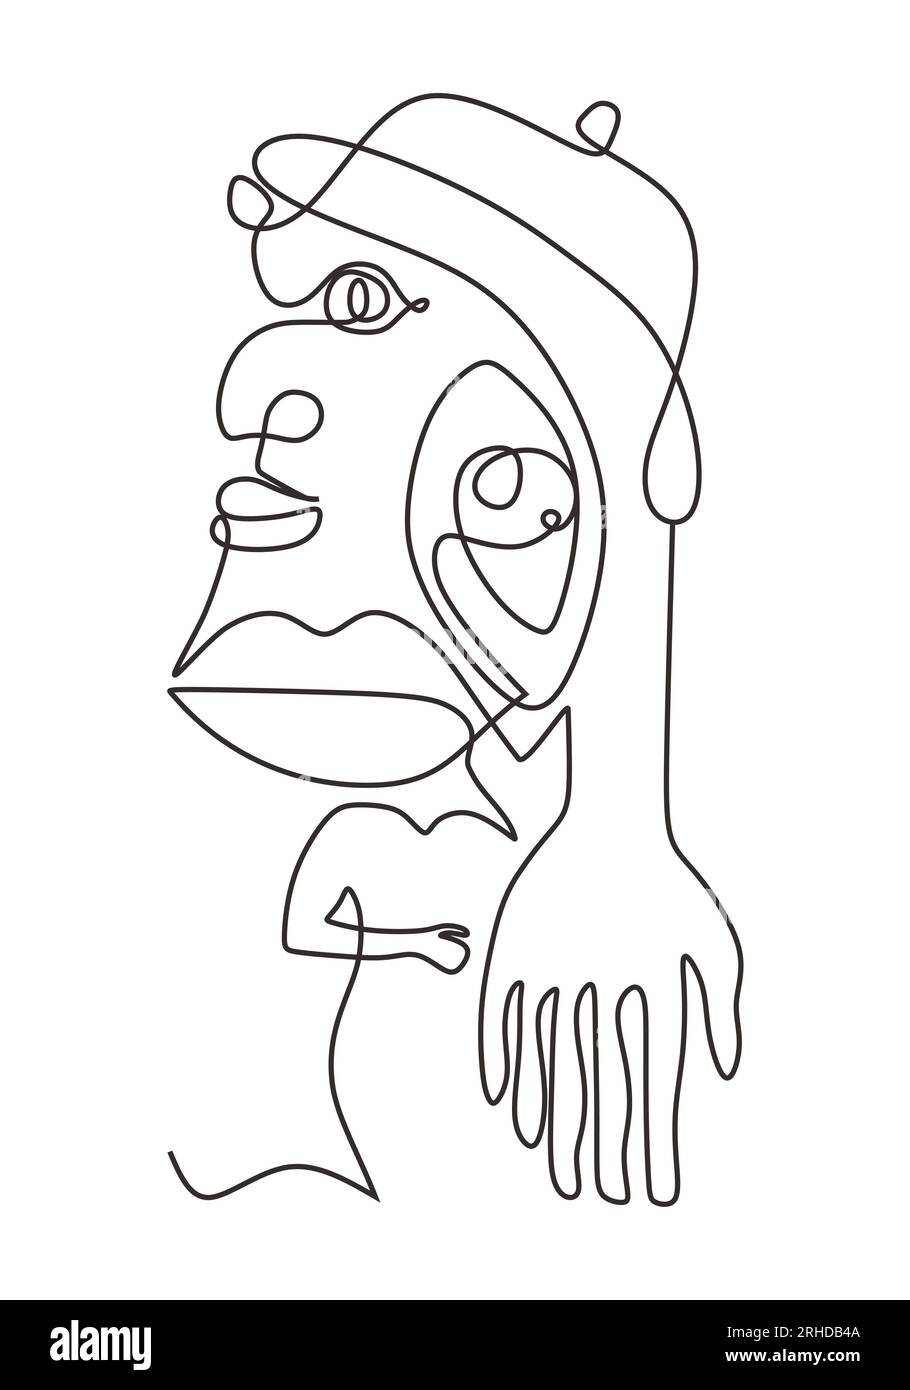 Abstract Single Line Face Print, Line Art Face Poster